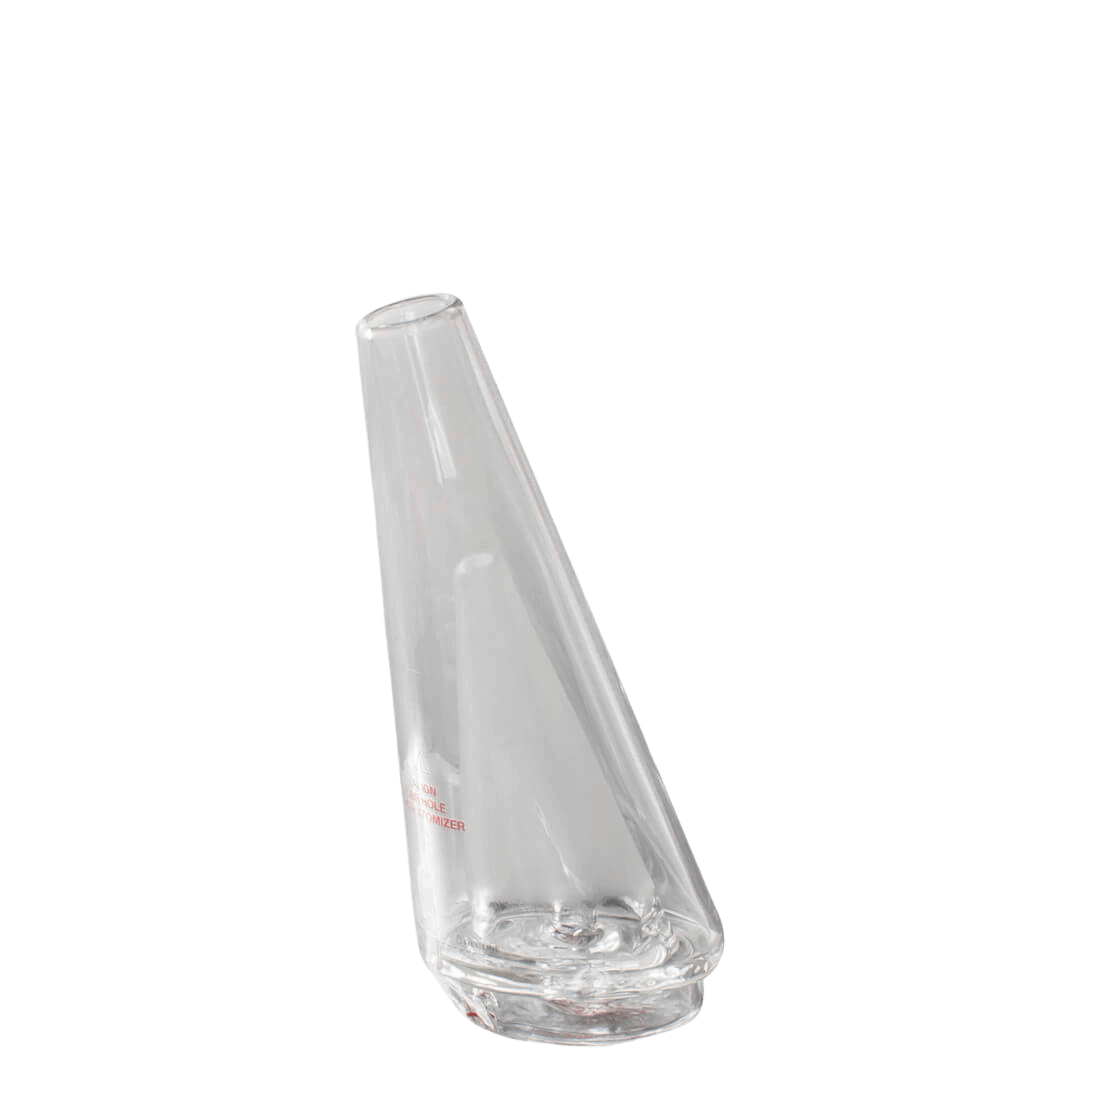 https://www.tothecloudvaporstore.com/wp-content/uploads/2019/01/puffco-Peak-replacement-glass.png